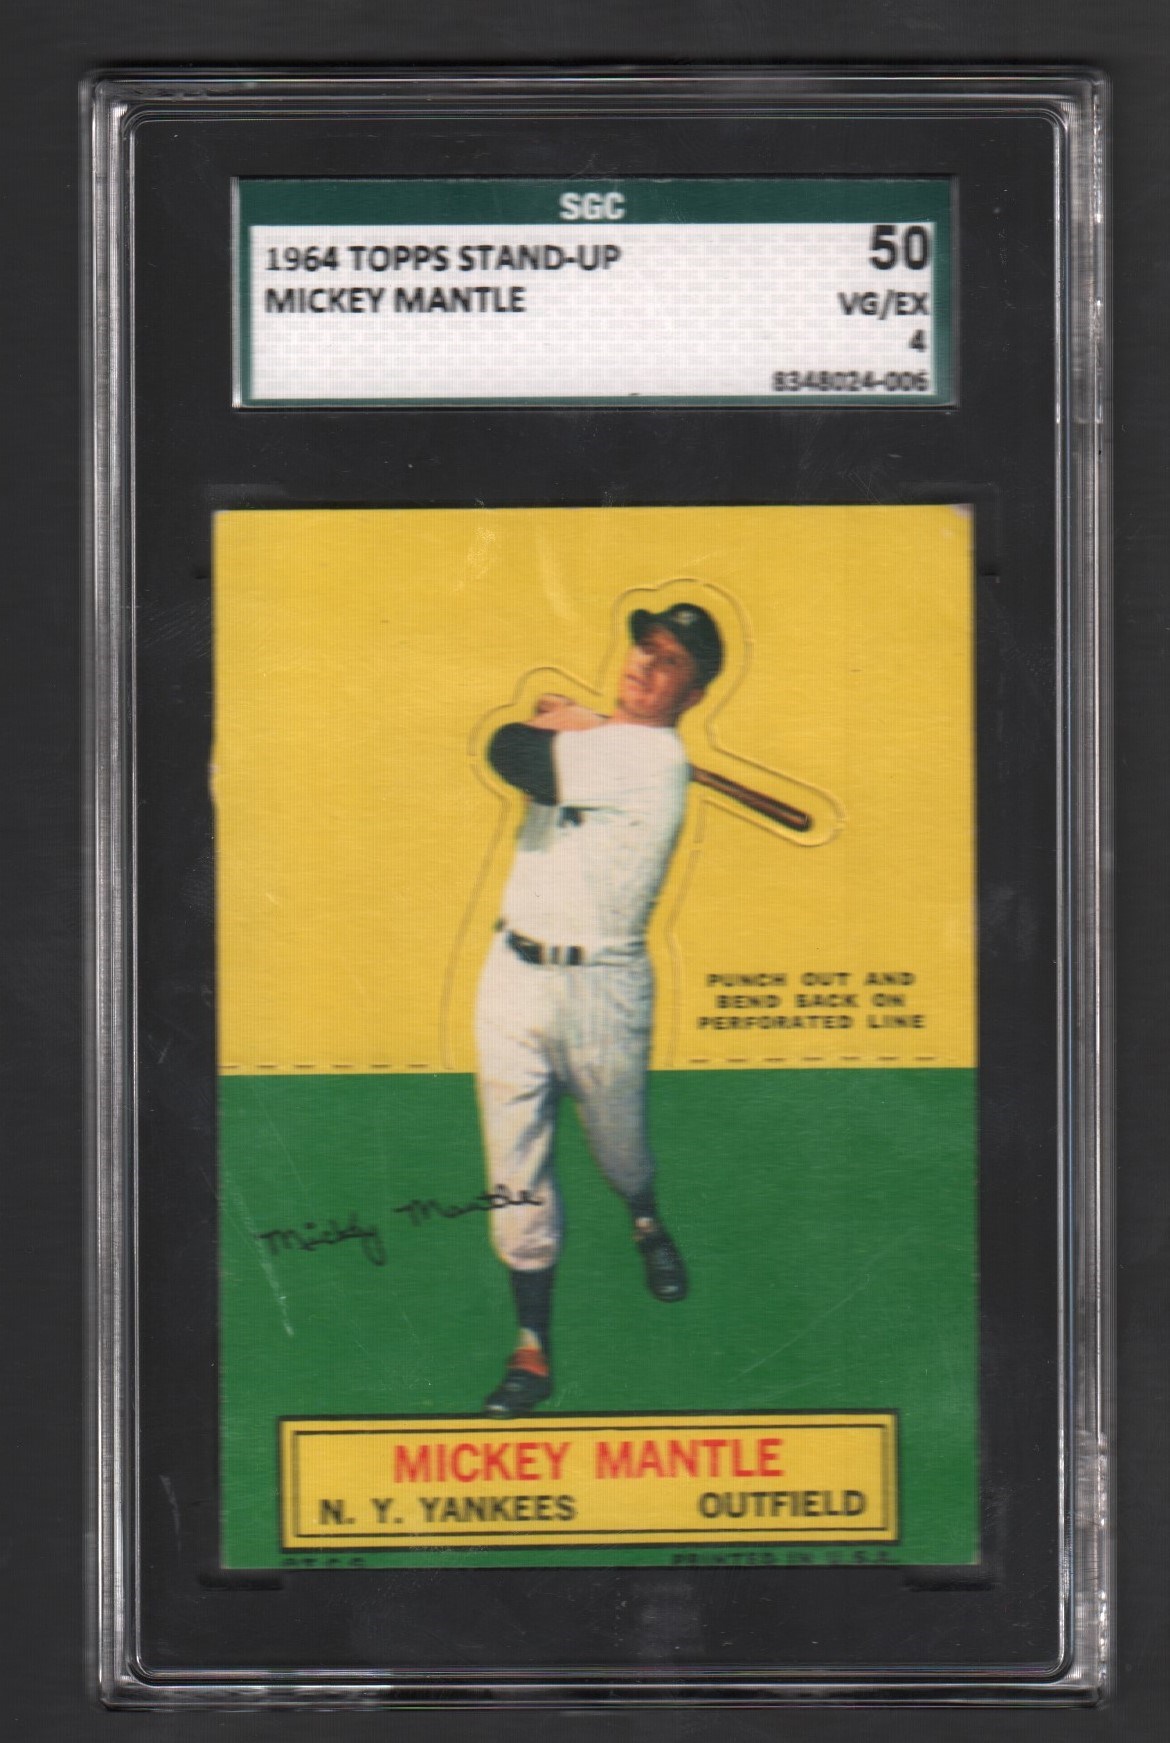 1964 Topps Stand Up Mickey Mantle - SGC 50 VG/EX 4